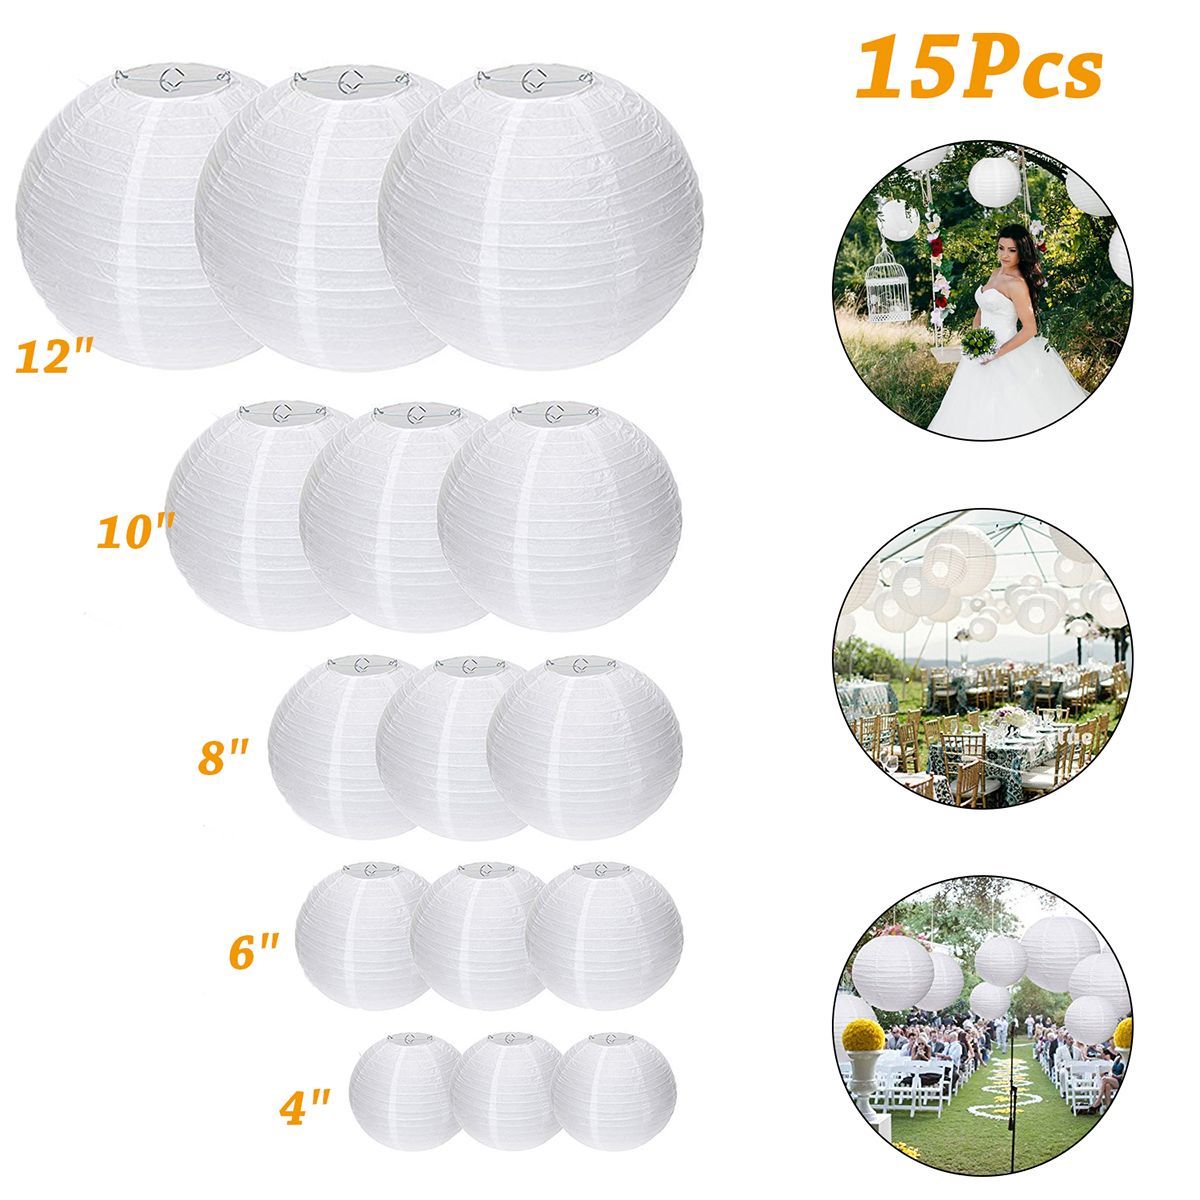 15Packs-White-Round-Paper-Lanterns-with-Assorted-Sizes-for-Wedding-Party-Decorations-1638709